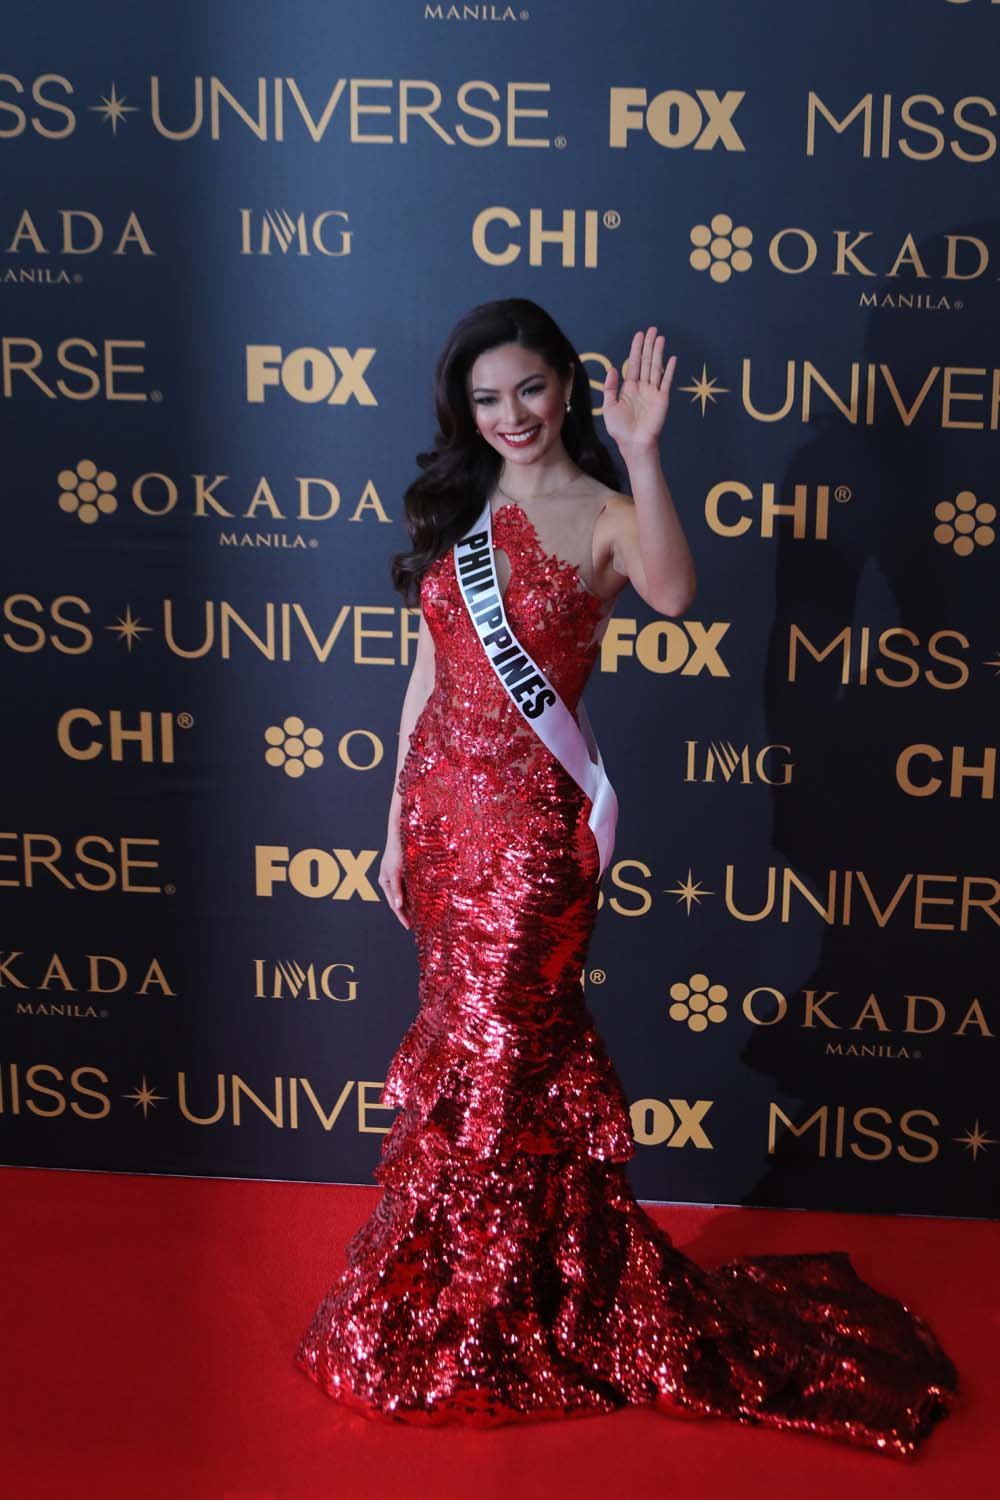 Miss Universe Philippines Maxine Medina waves to media at Red Carpet event